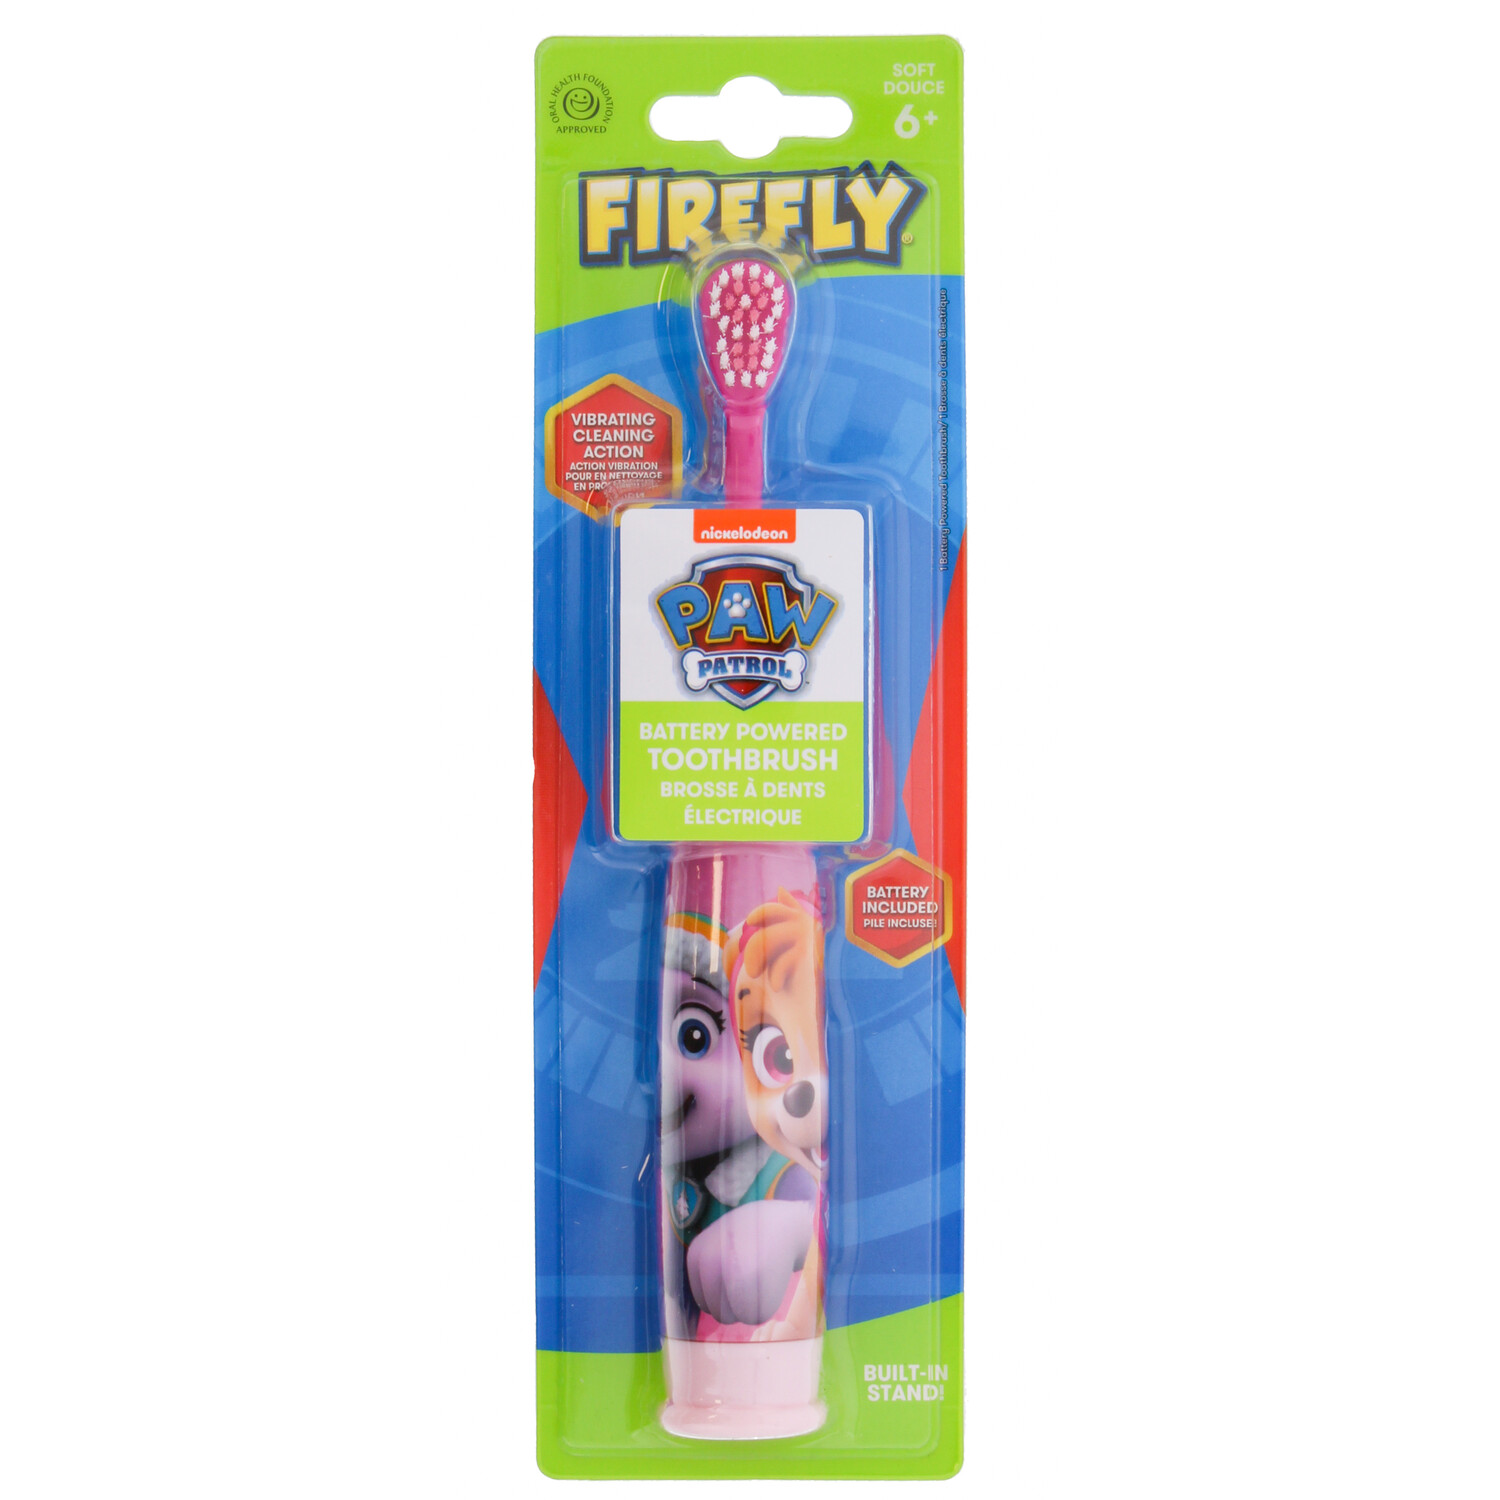 Firefly Paw Patrol Battery Powered Toothbrush - Pink Image 1